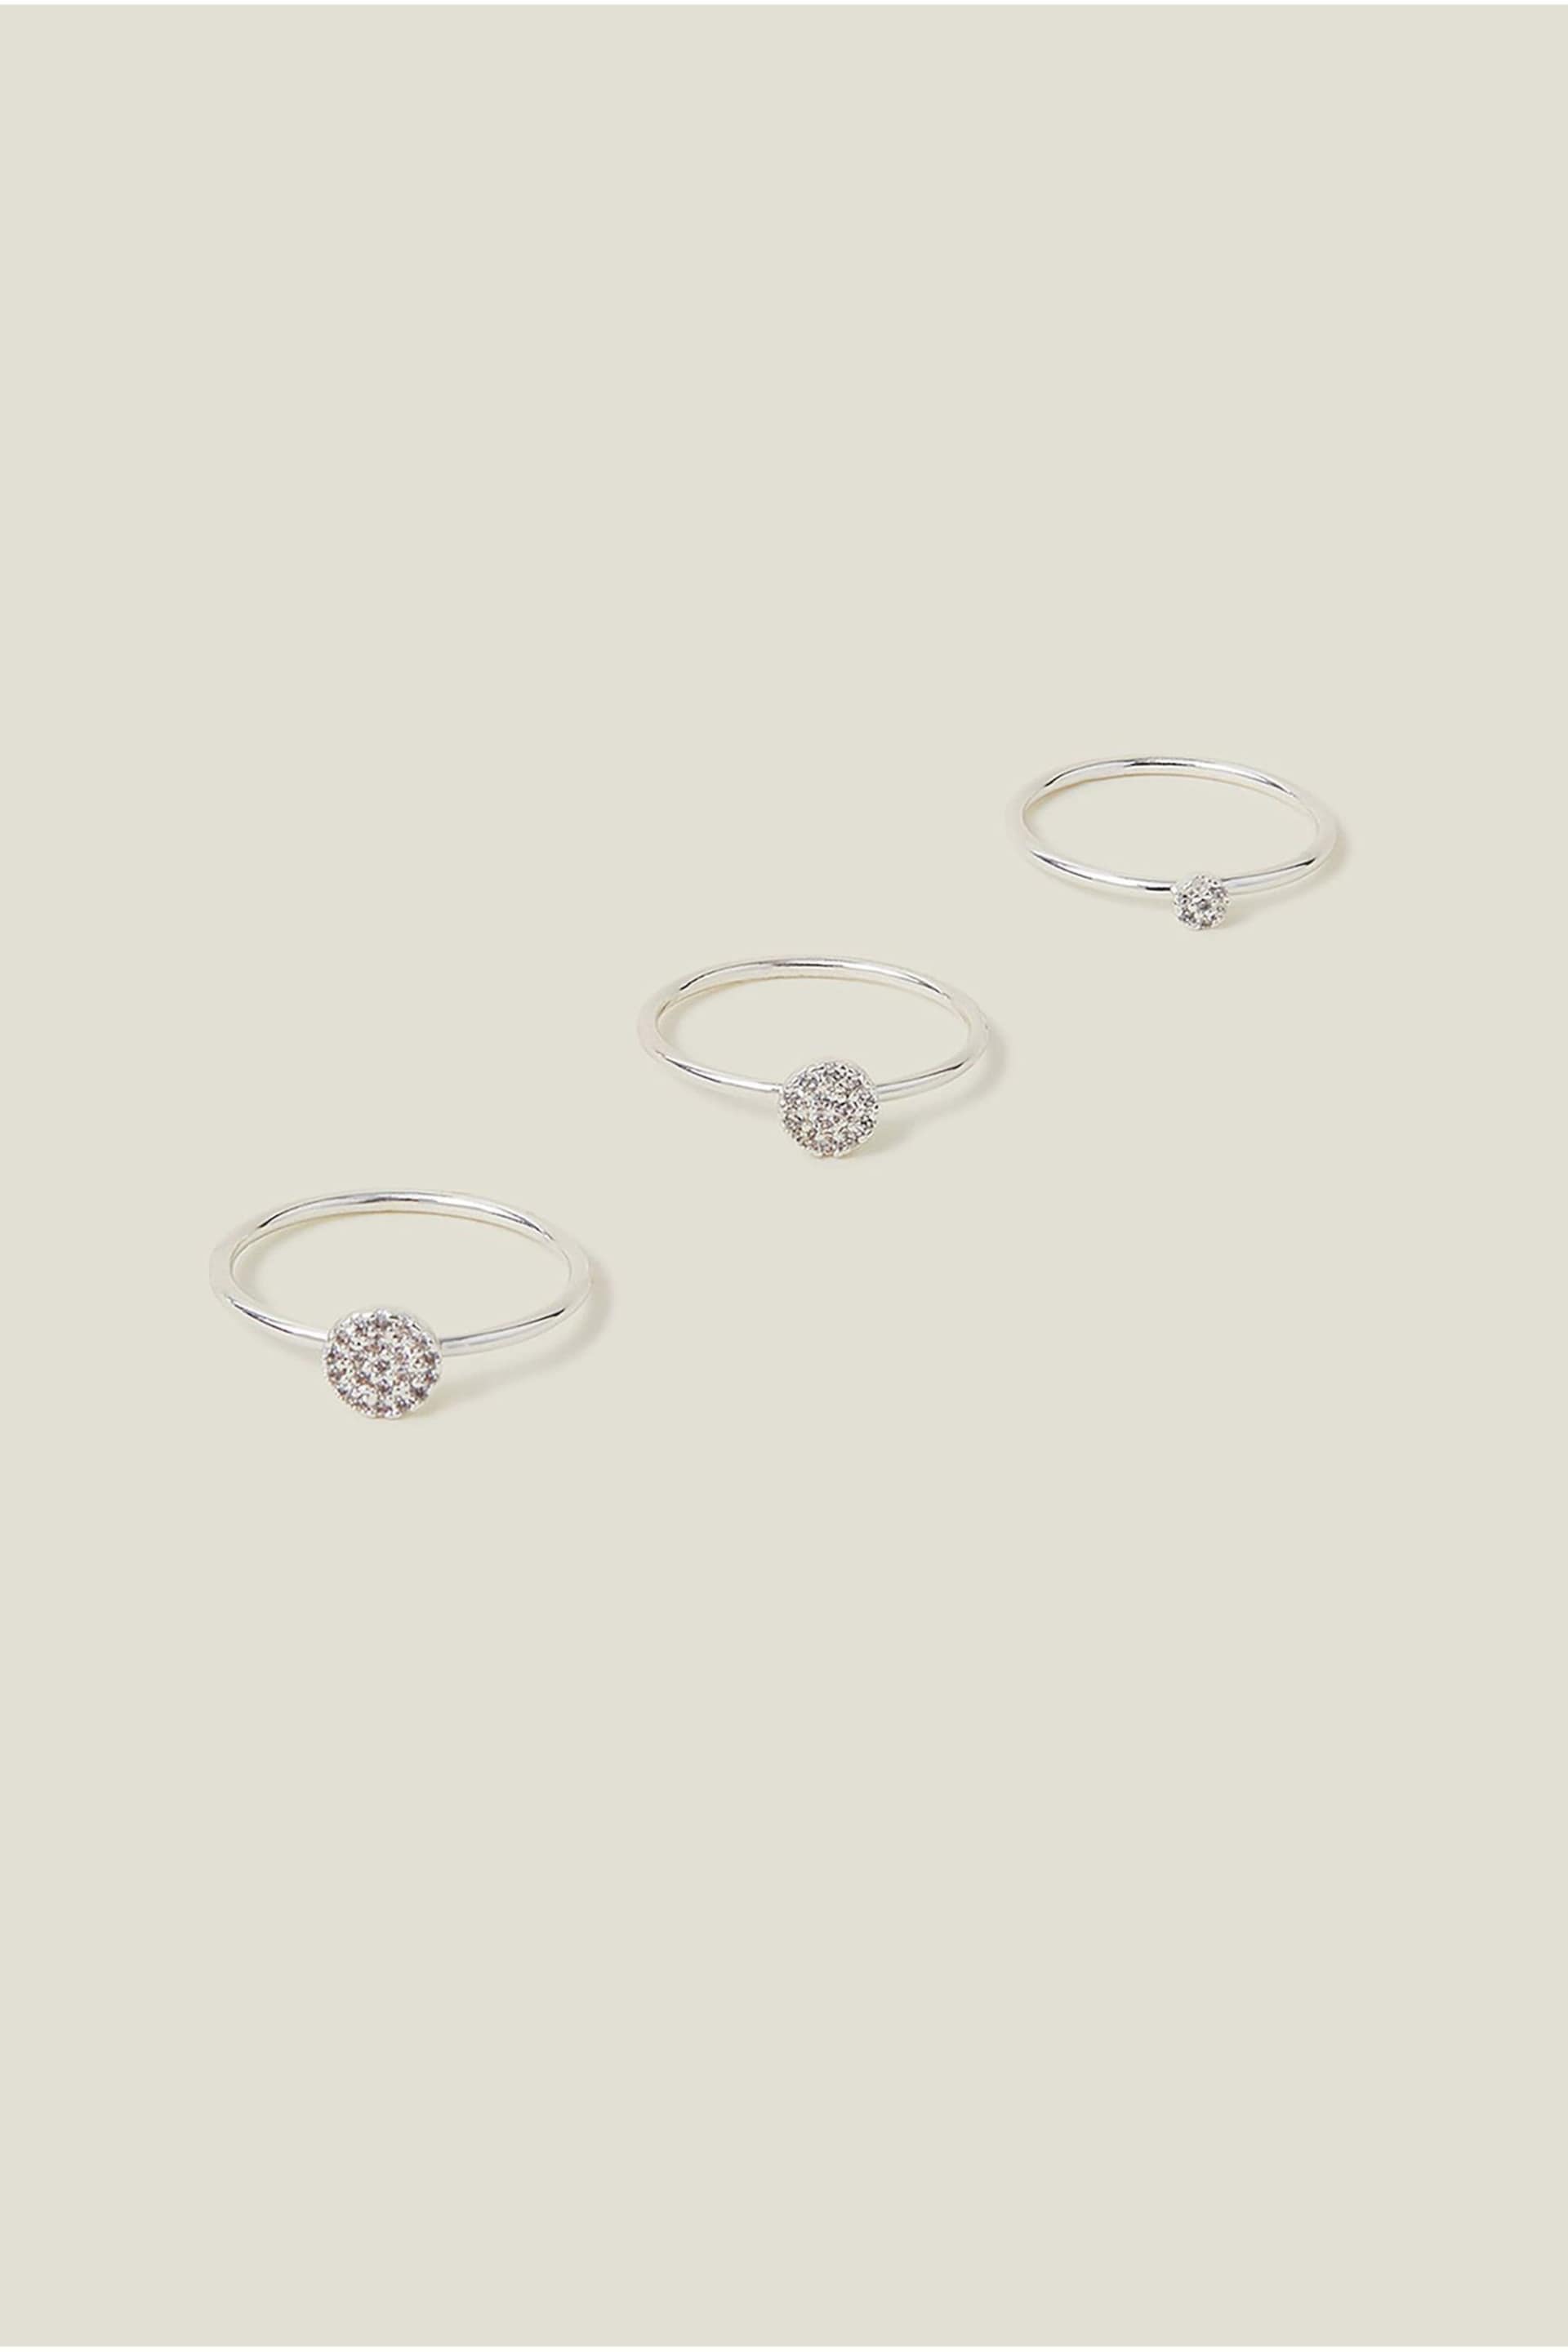 Accessorize Sterling Silver Plated Sparkle Rings 3 Pack - Image 1 of 3